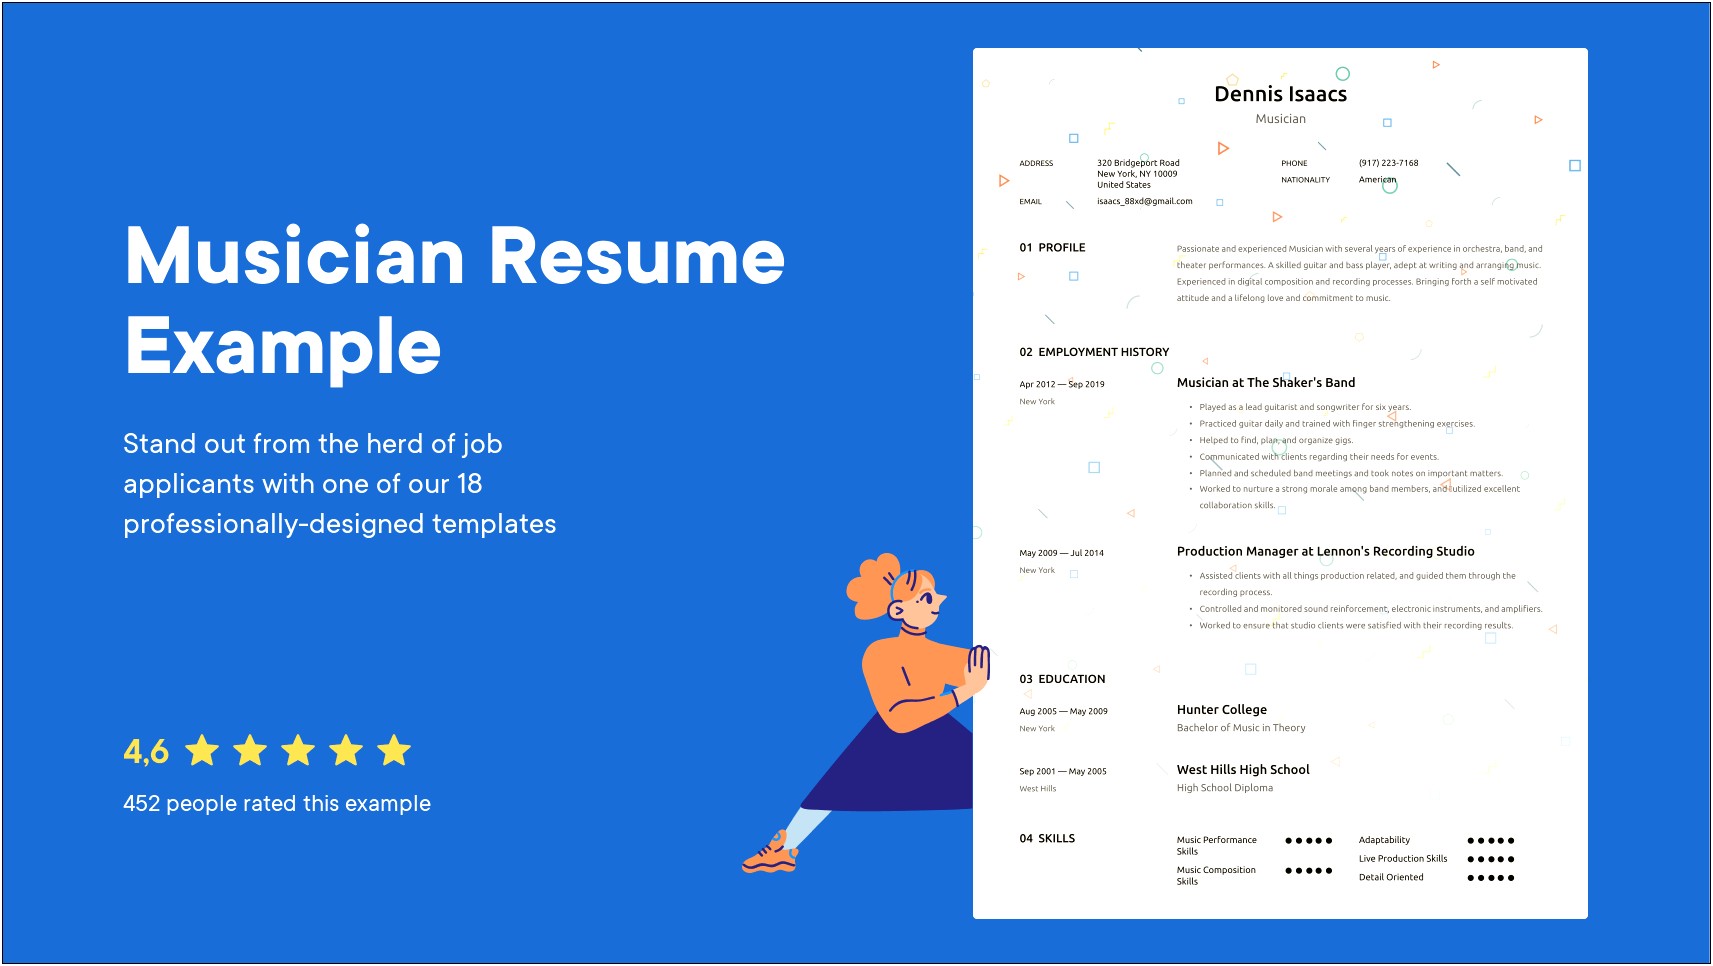 A Written Example Of A Musician Resume